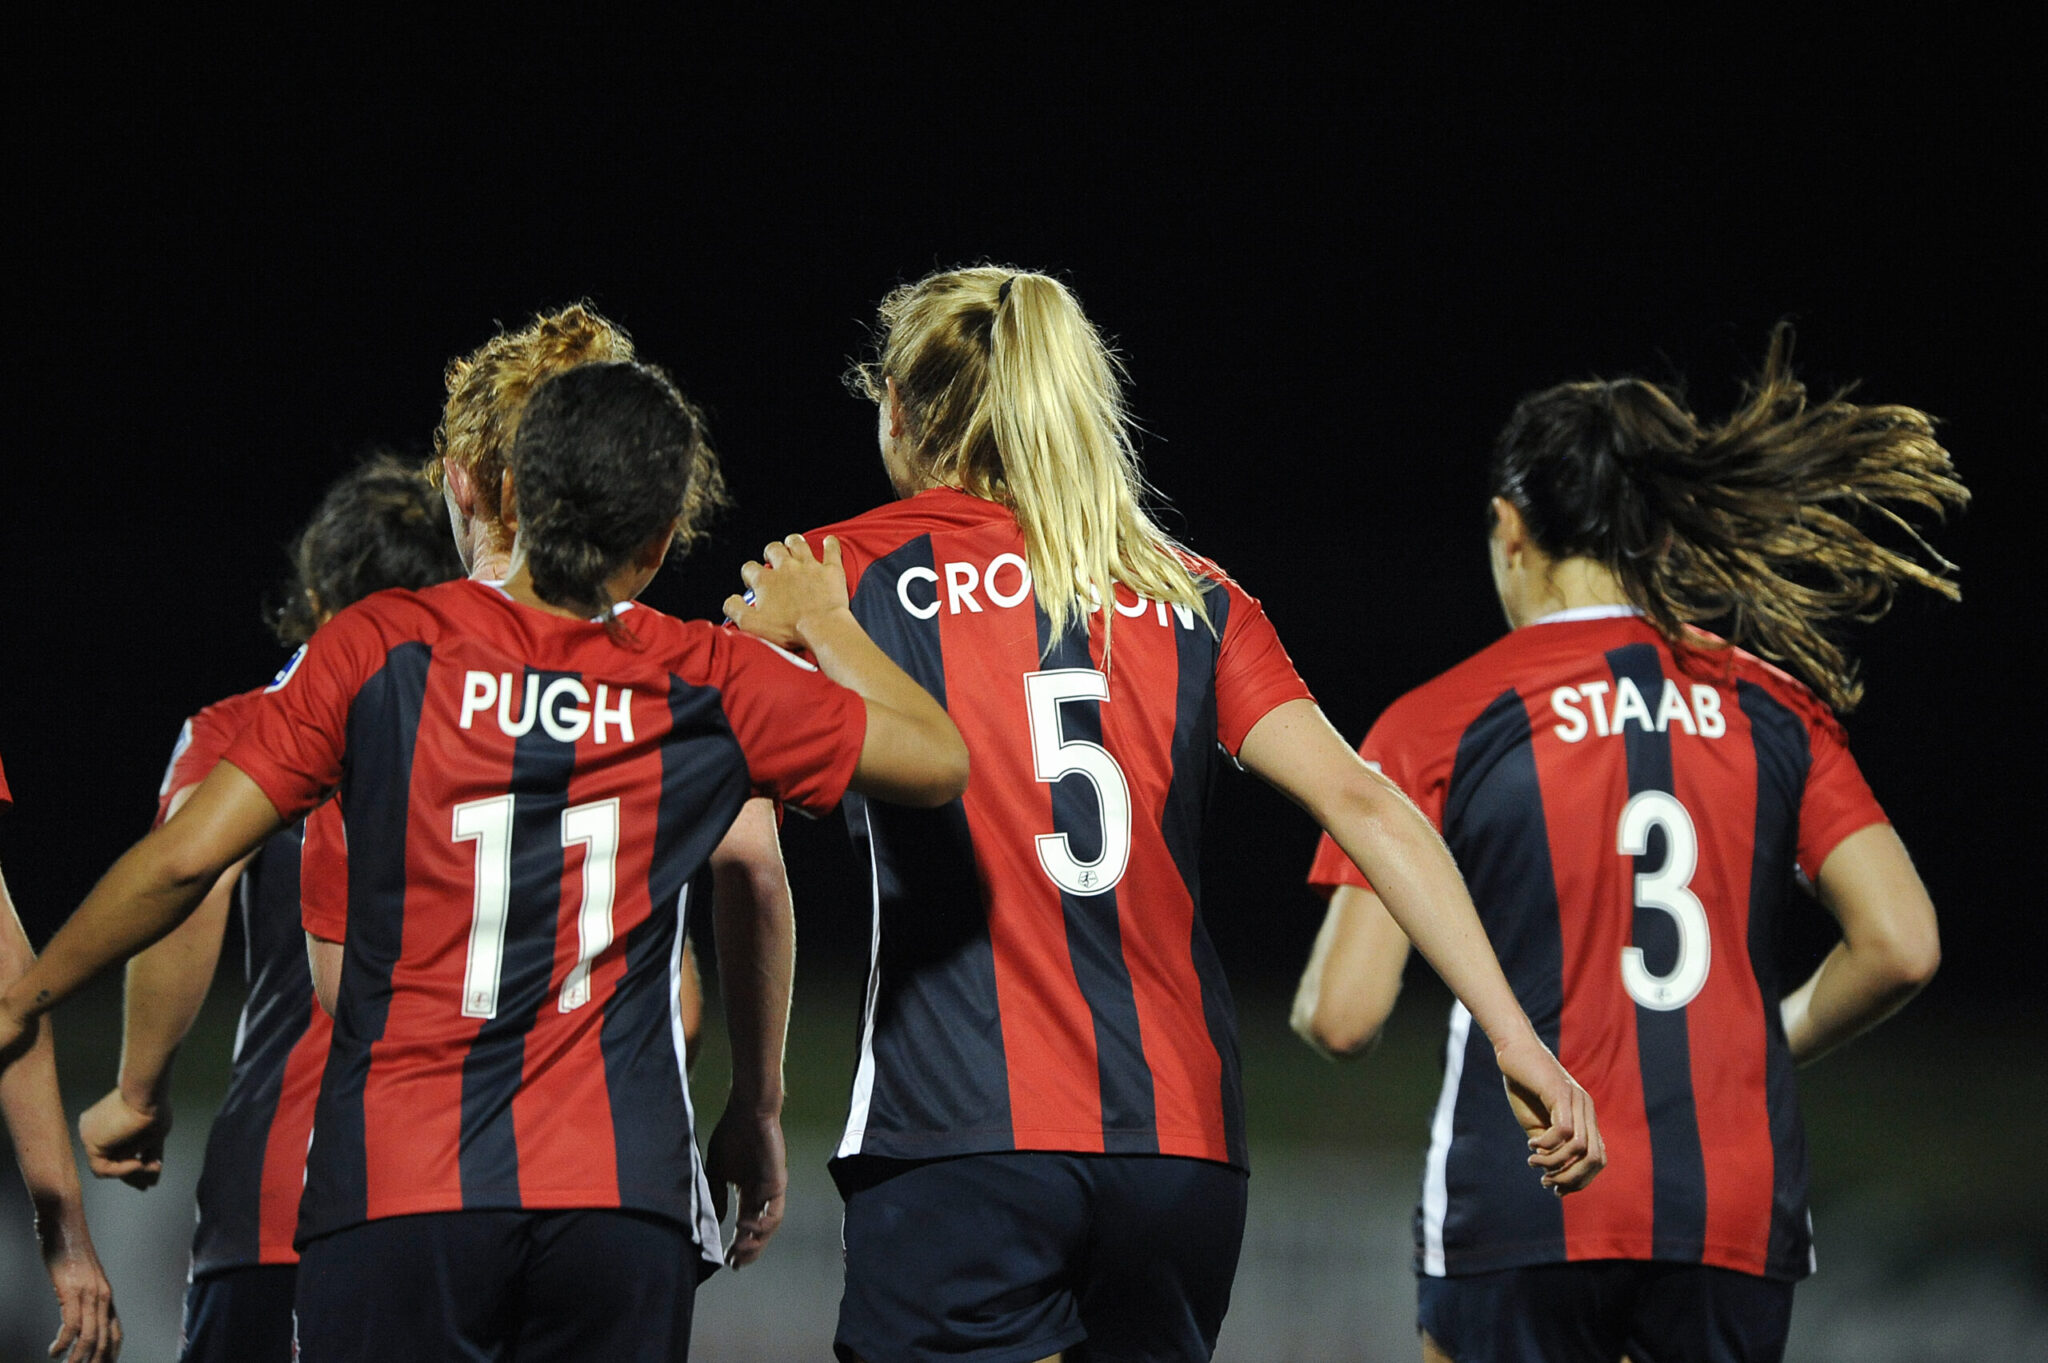 Spirit newcomers Staab, Crosson, on what it means to score their first NWSL goals Featured Image